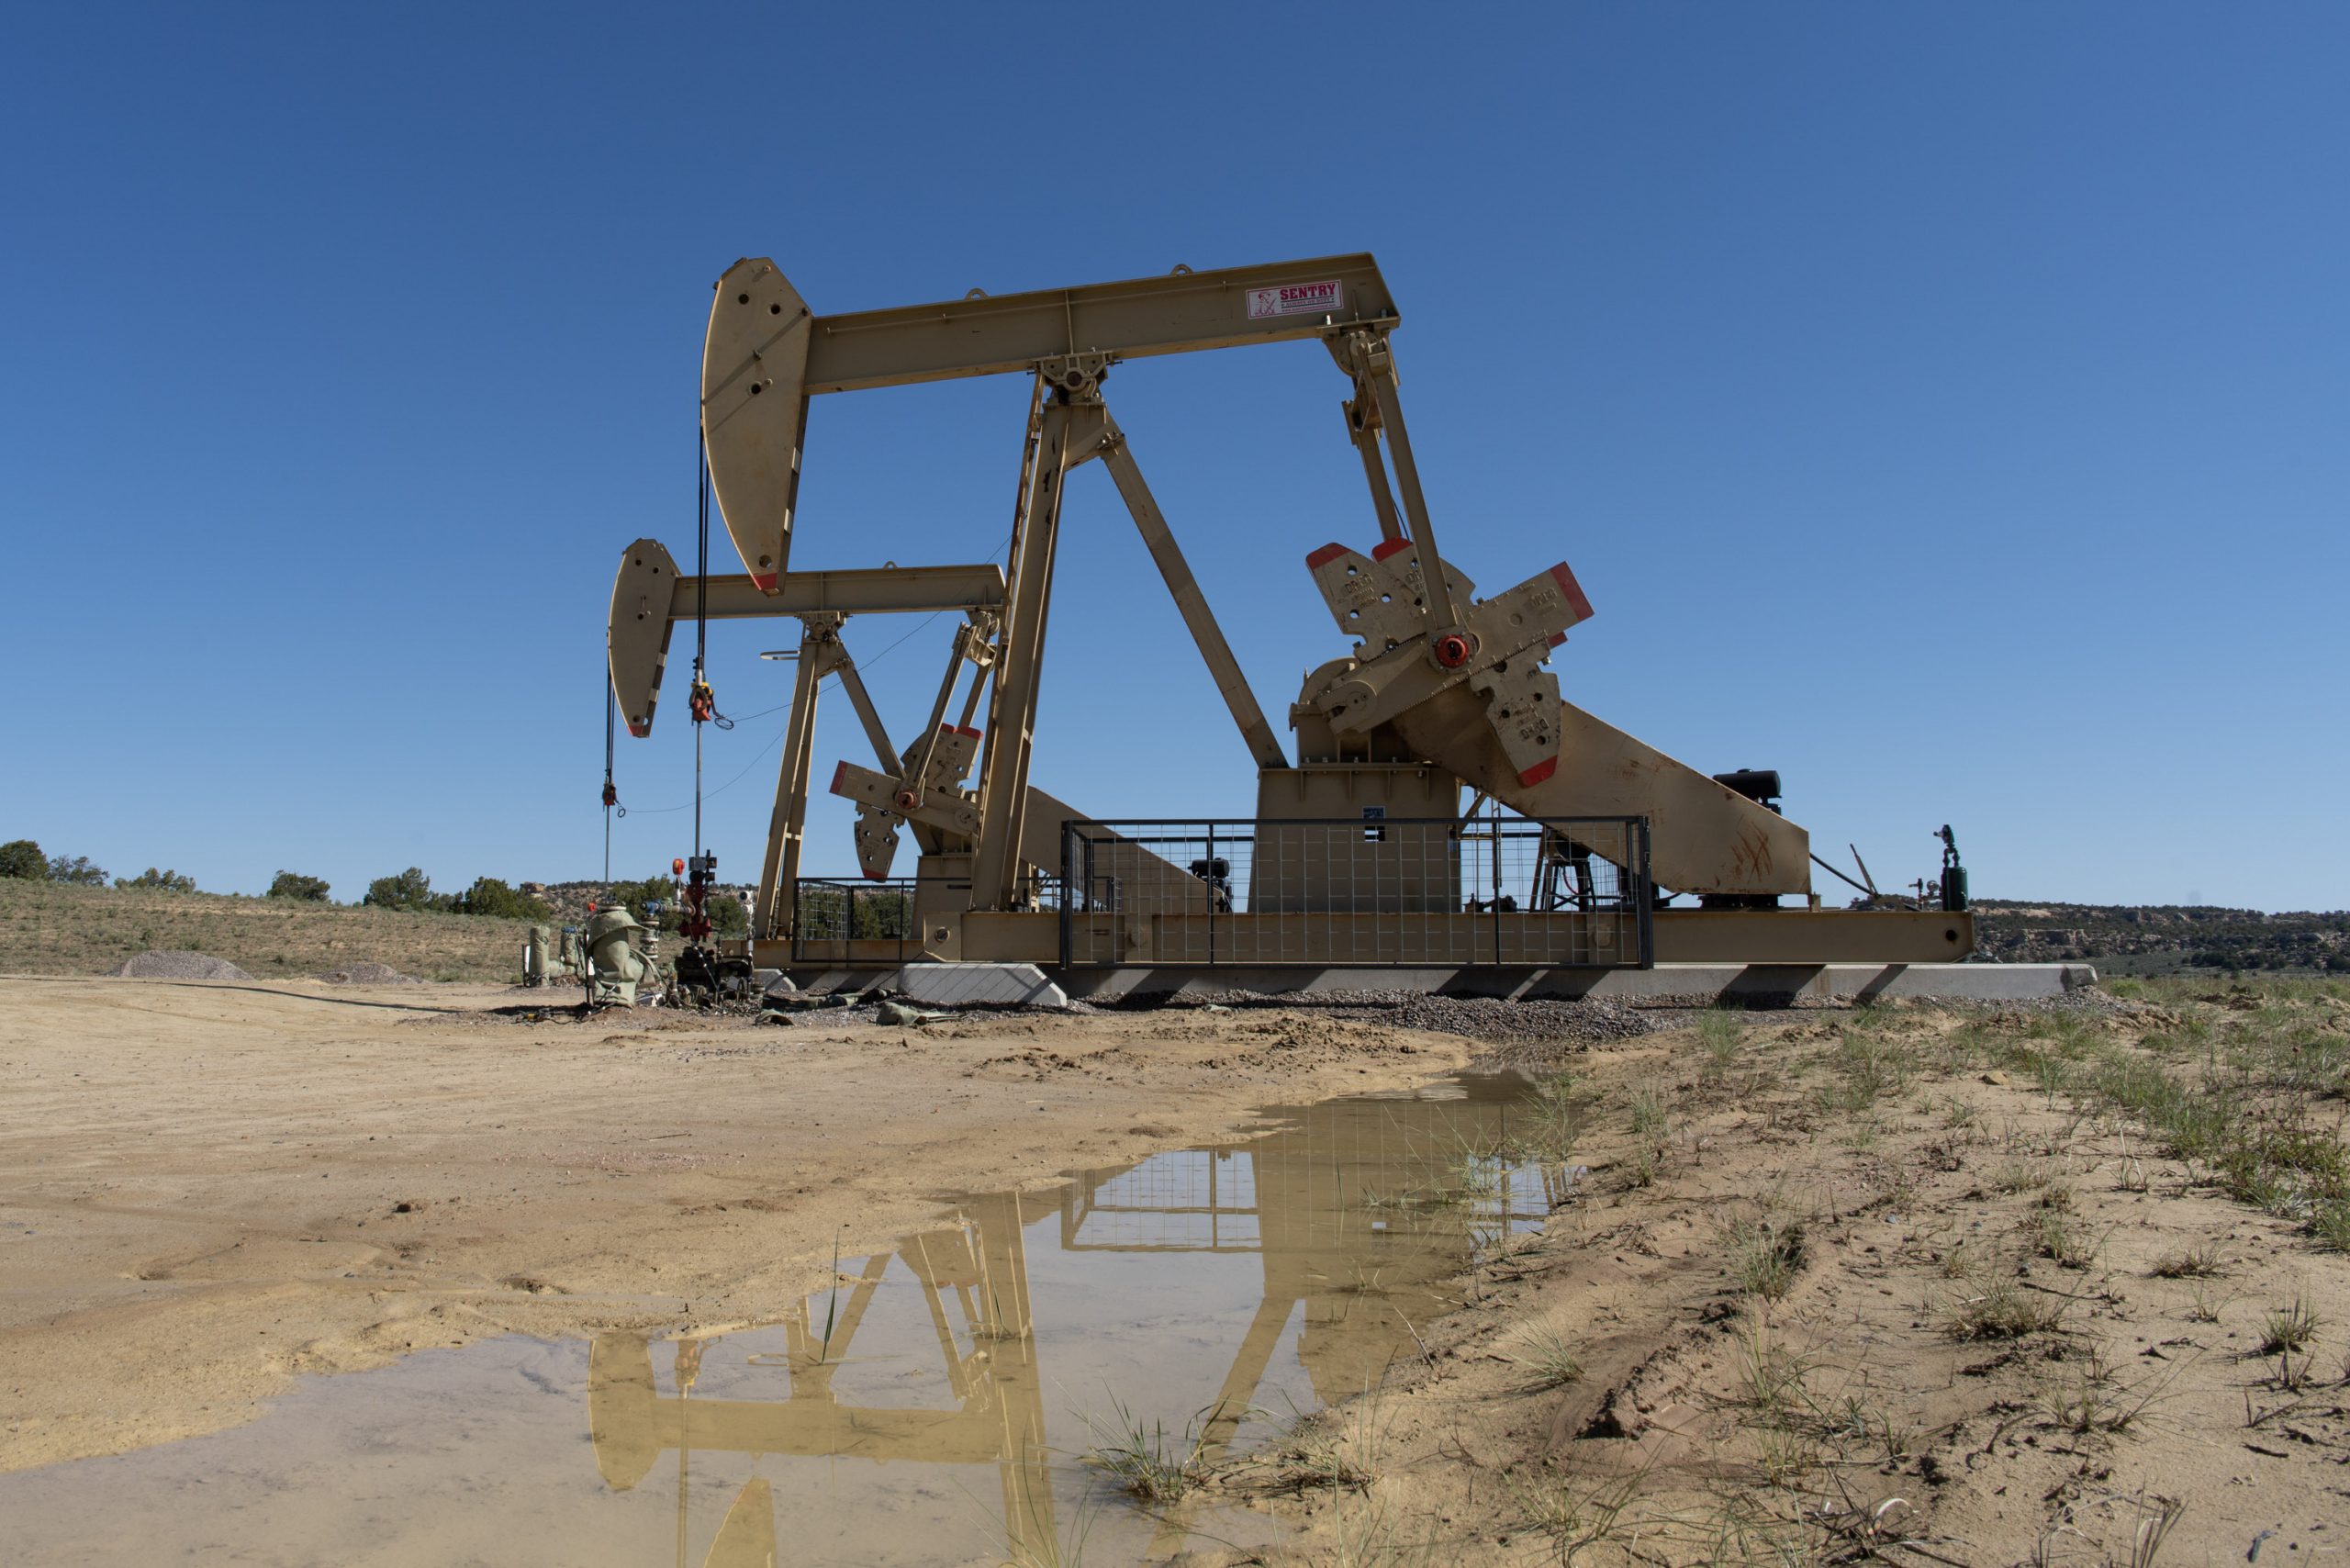 The price of oil: Expanding development near Chaco raises health concerns